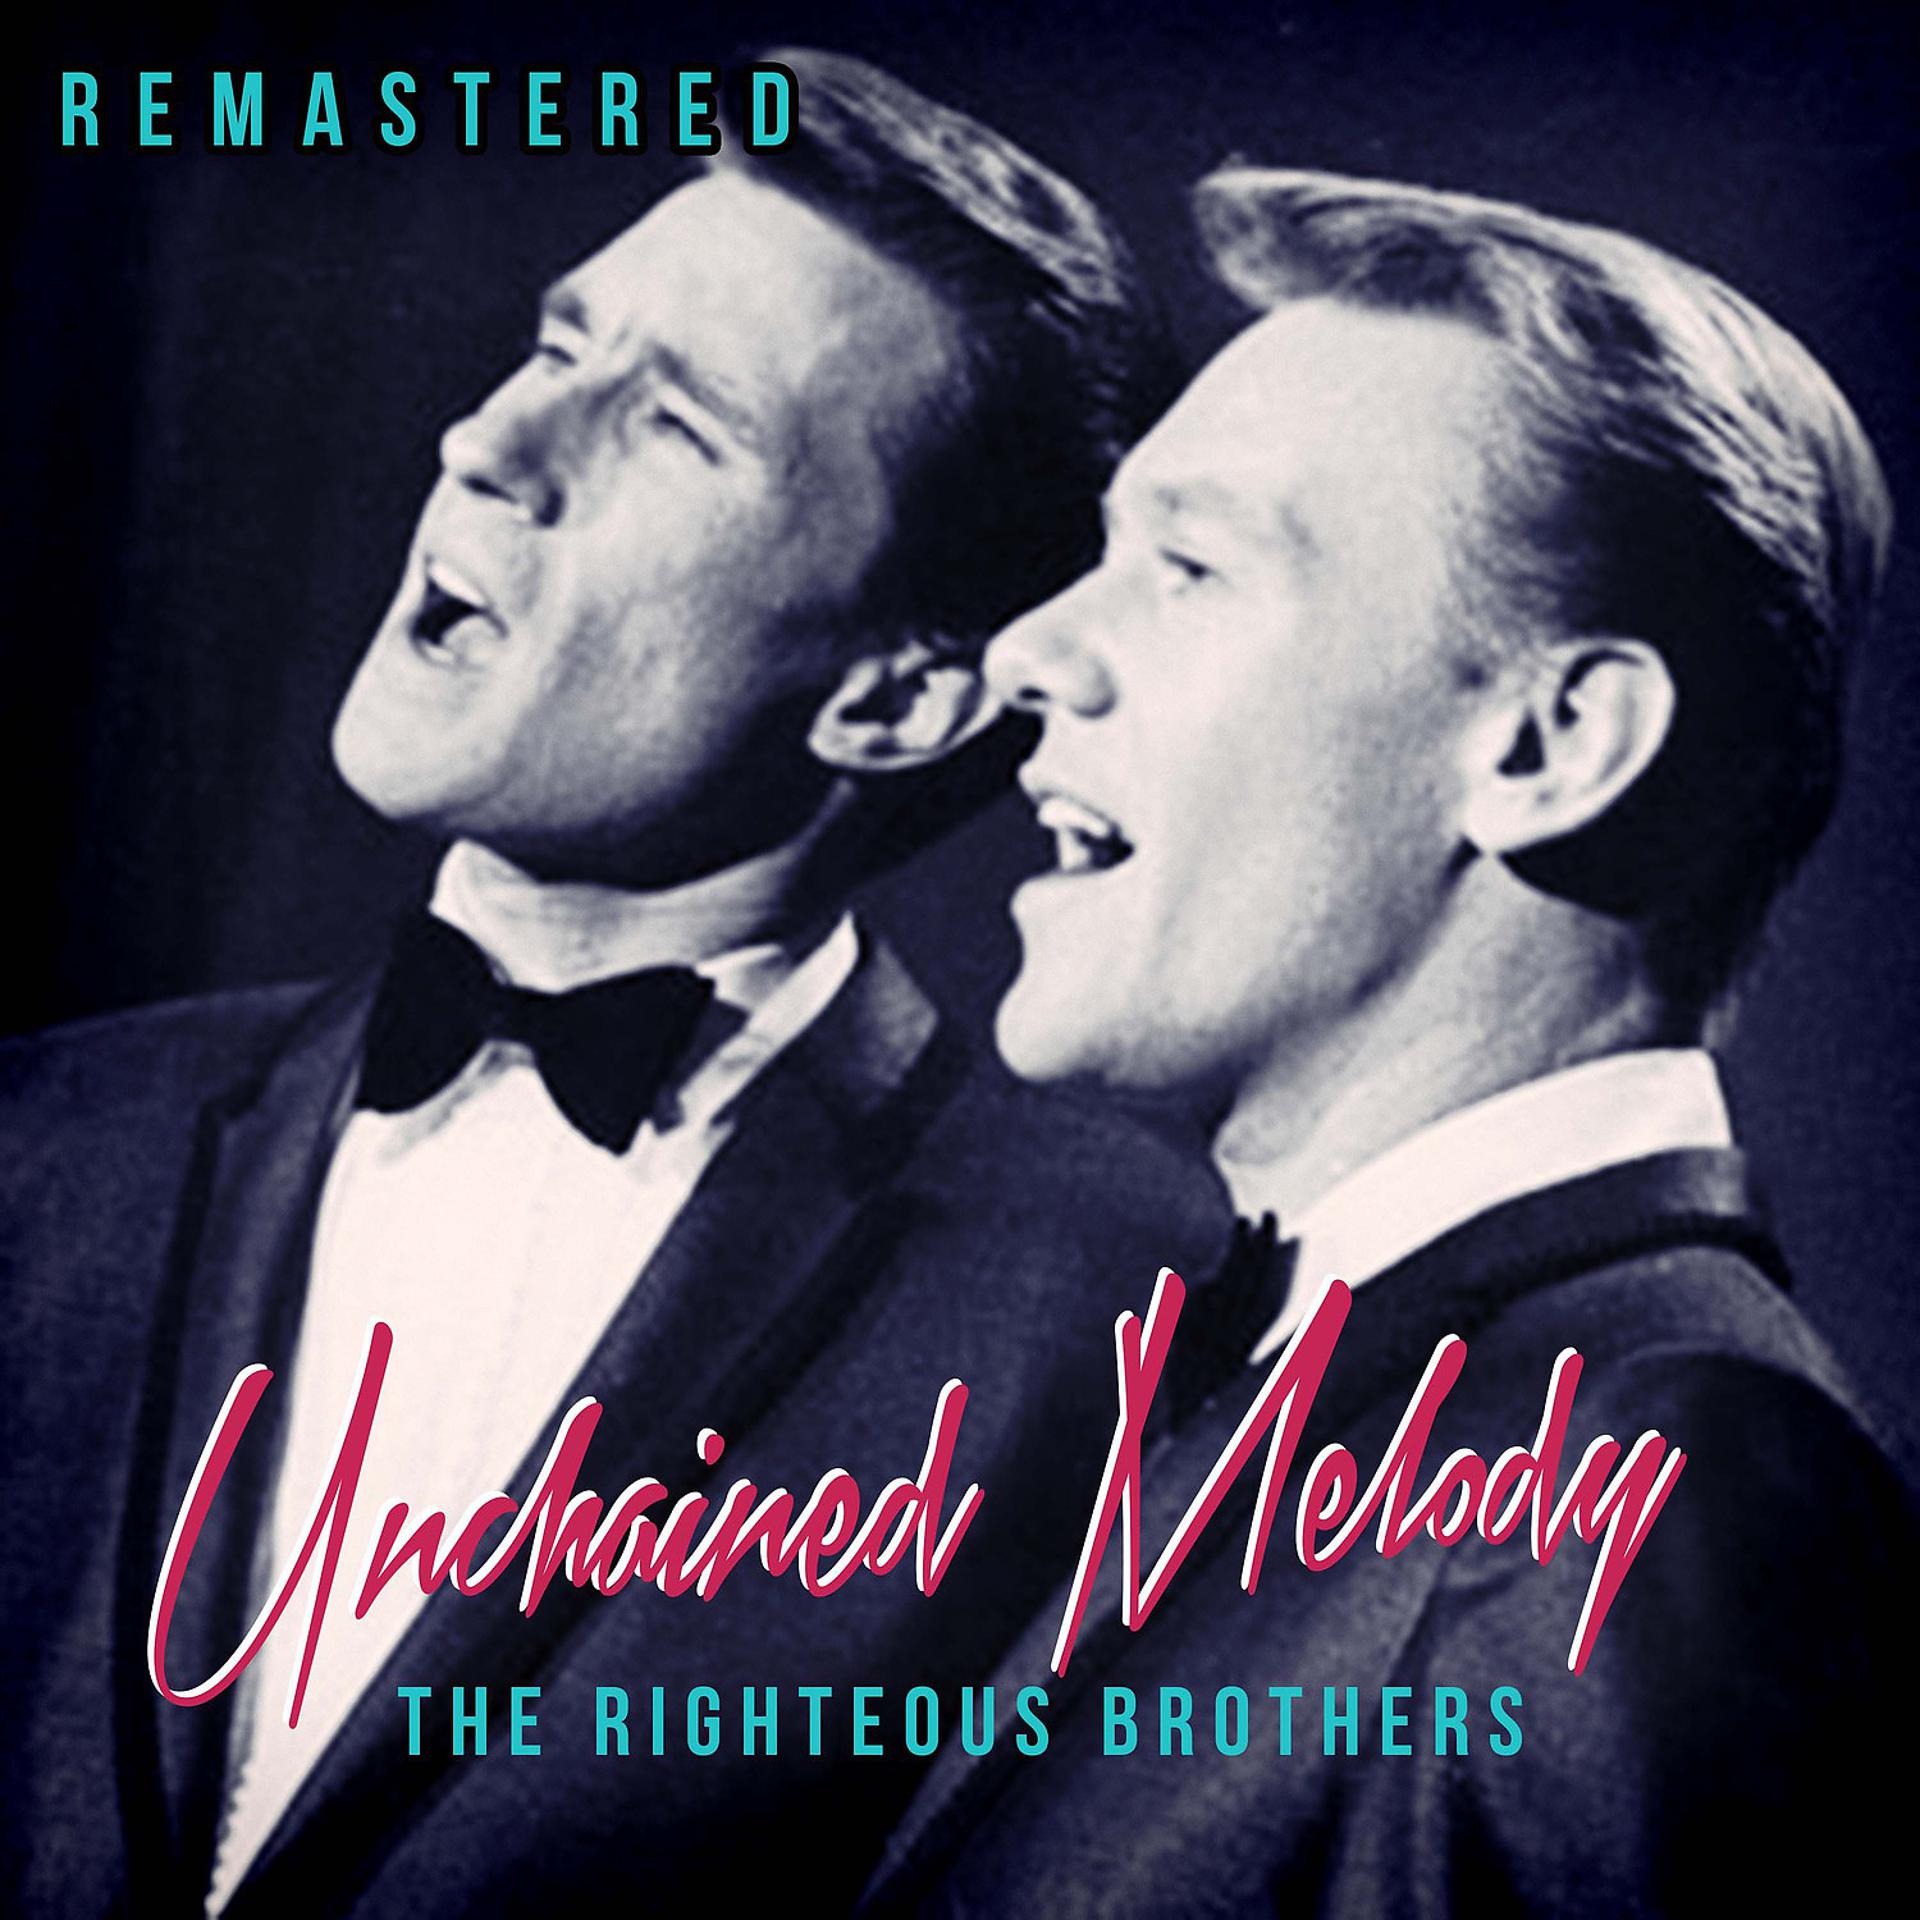 The righteous brothers unchained melody. The Righteous brothers. The Righteous brothers you've Lost that Lovin' Feelin Ноты. The Righteous brothers you've Lost that Lovin' Feelin' Ноты для гитары.